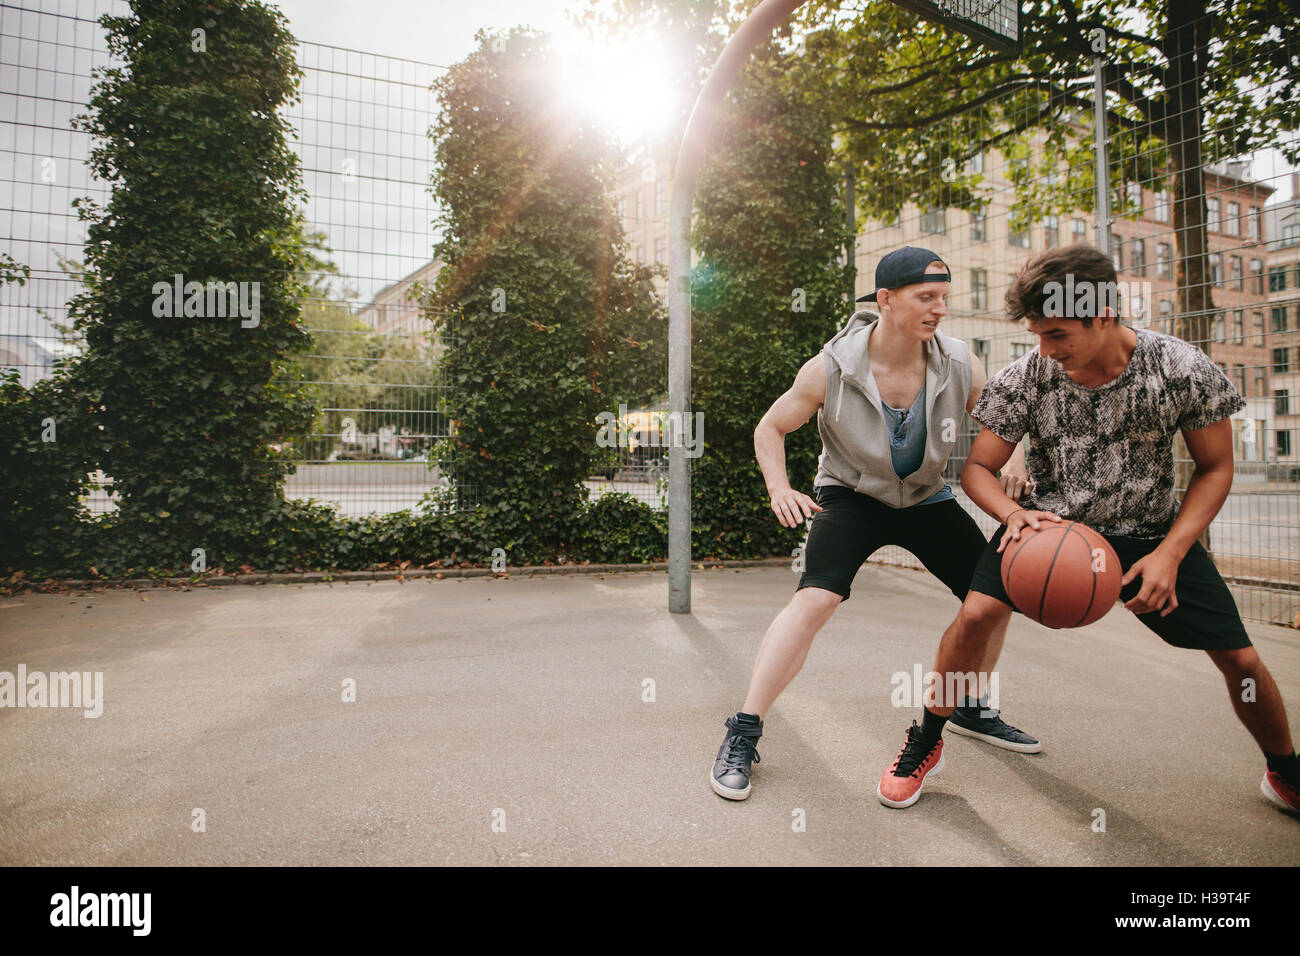 Young men playing a game of basketball on an outdoor court. Teenage friends playing basketball against each other. Stock Photo